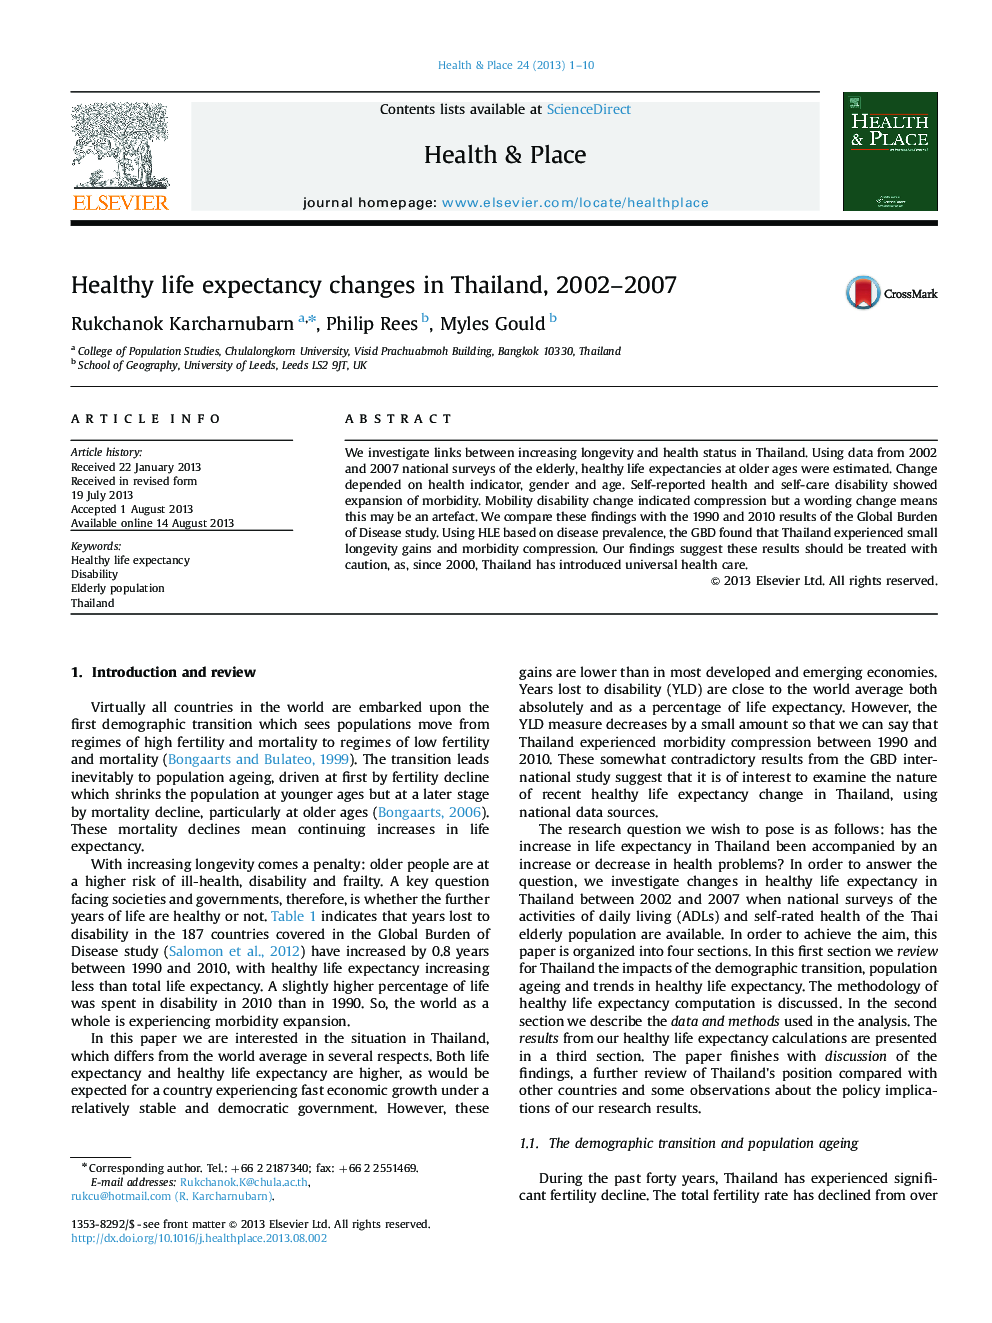 Healthy life expectancy changes in Thailand, 2002-2007